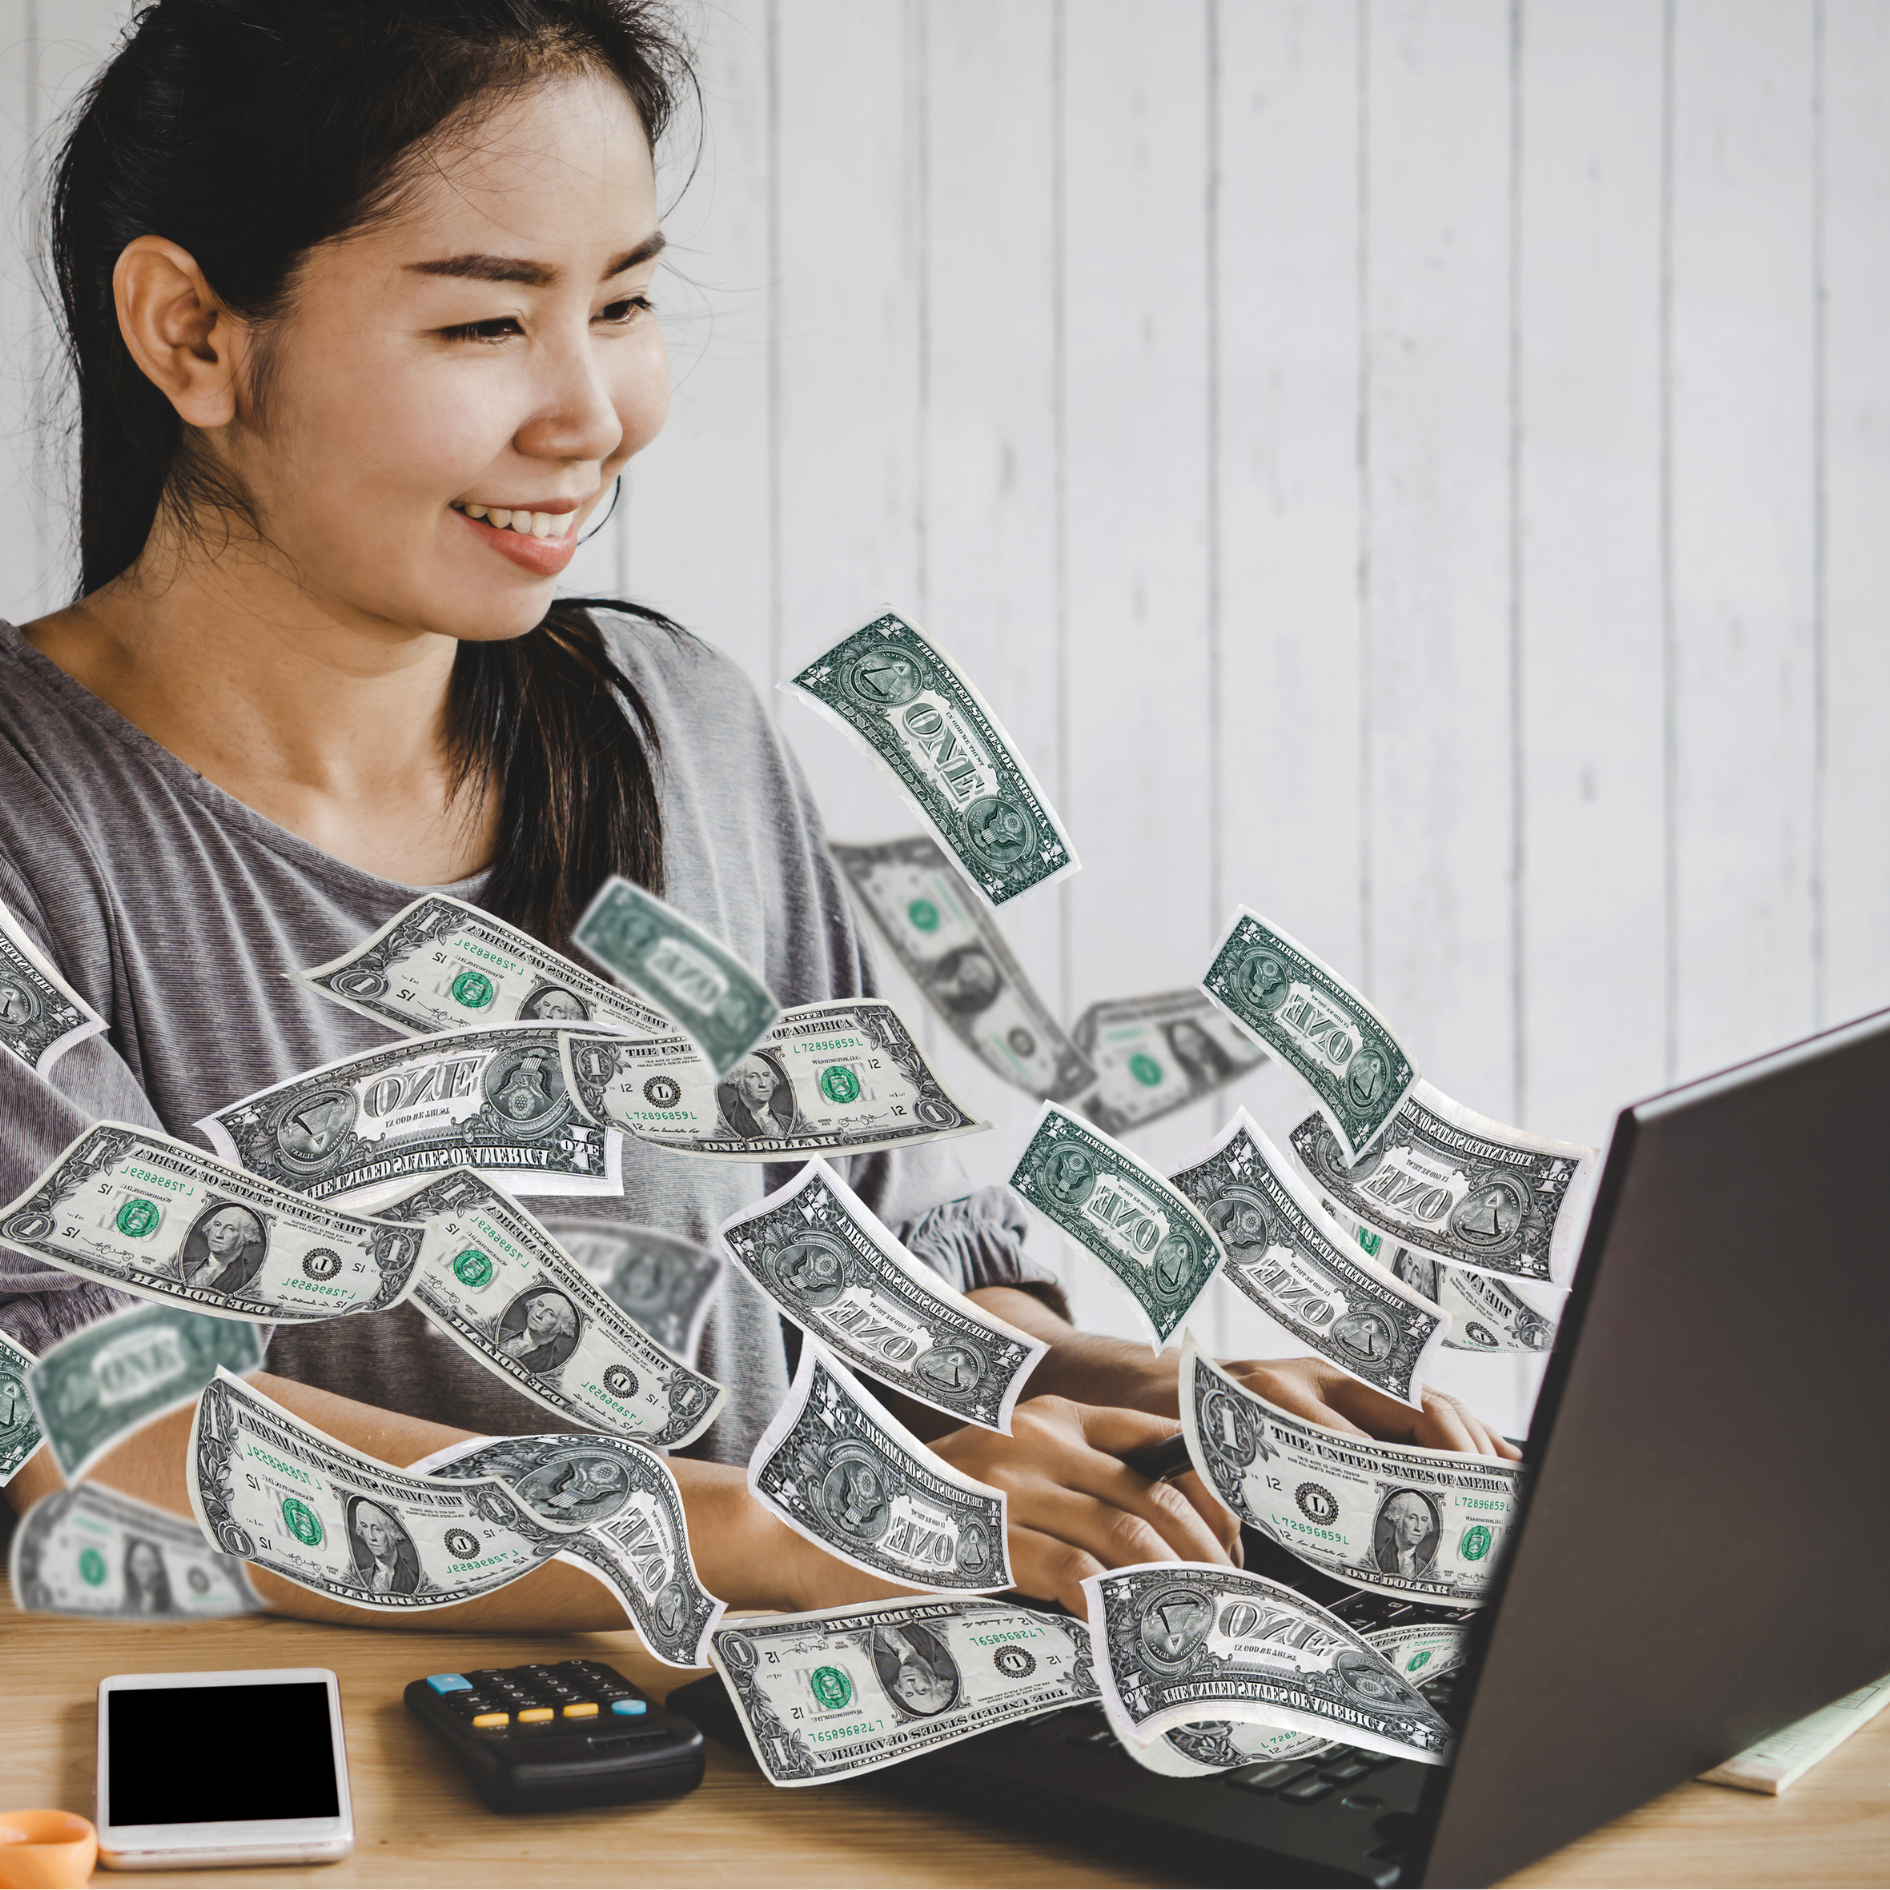 10 Lucrative Side Hustle Ideas to Make Money from Home